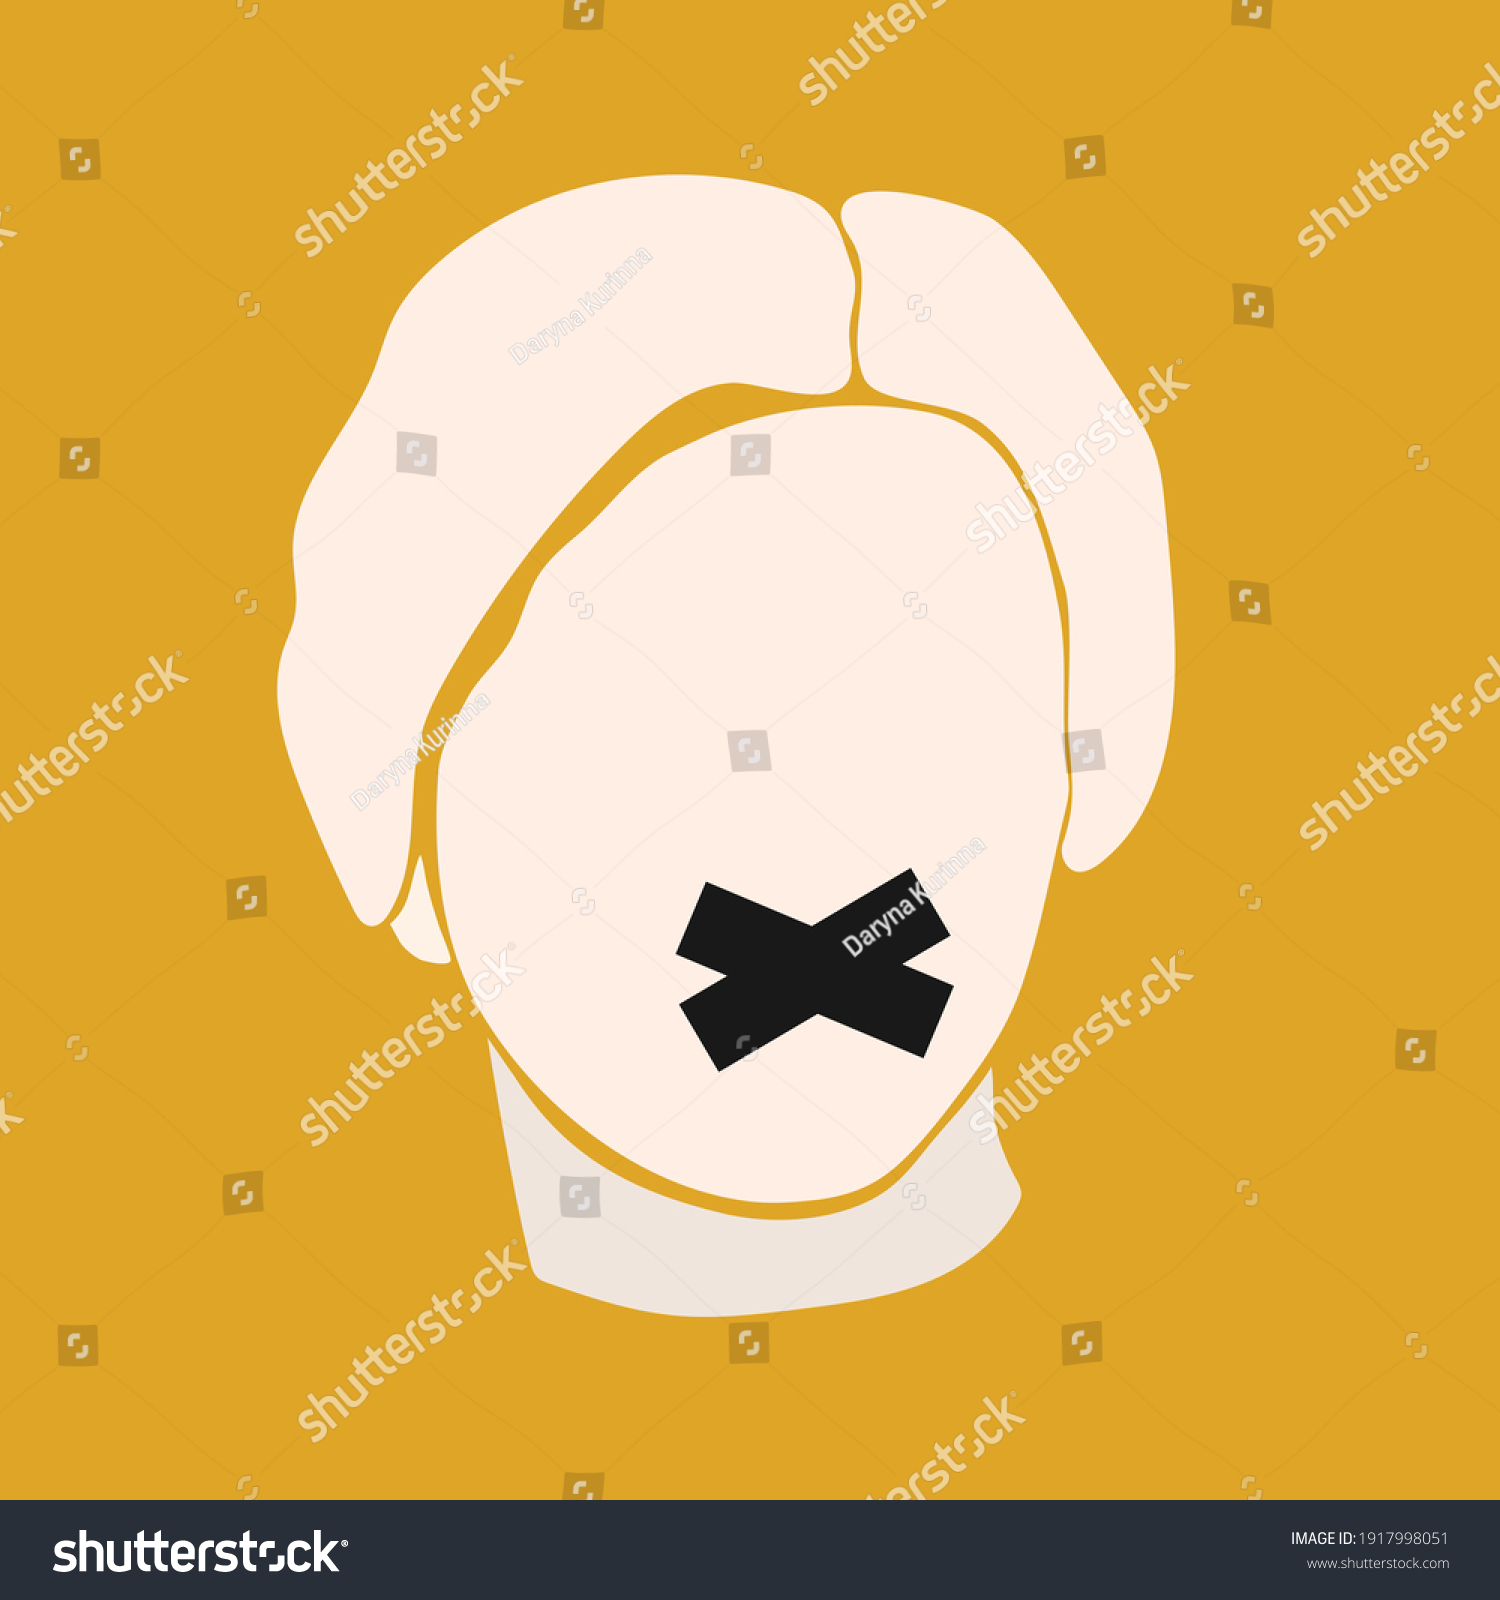 SVG of Female sealed mouth. Venus's head with the taped mouth. Censored. Poster, banner, design template. Feminism. Stop violence svg